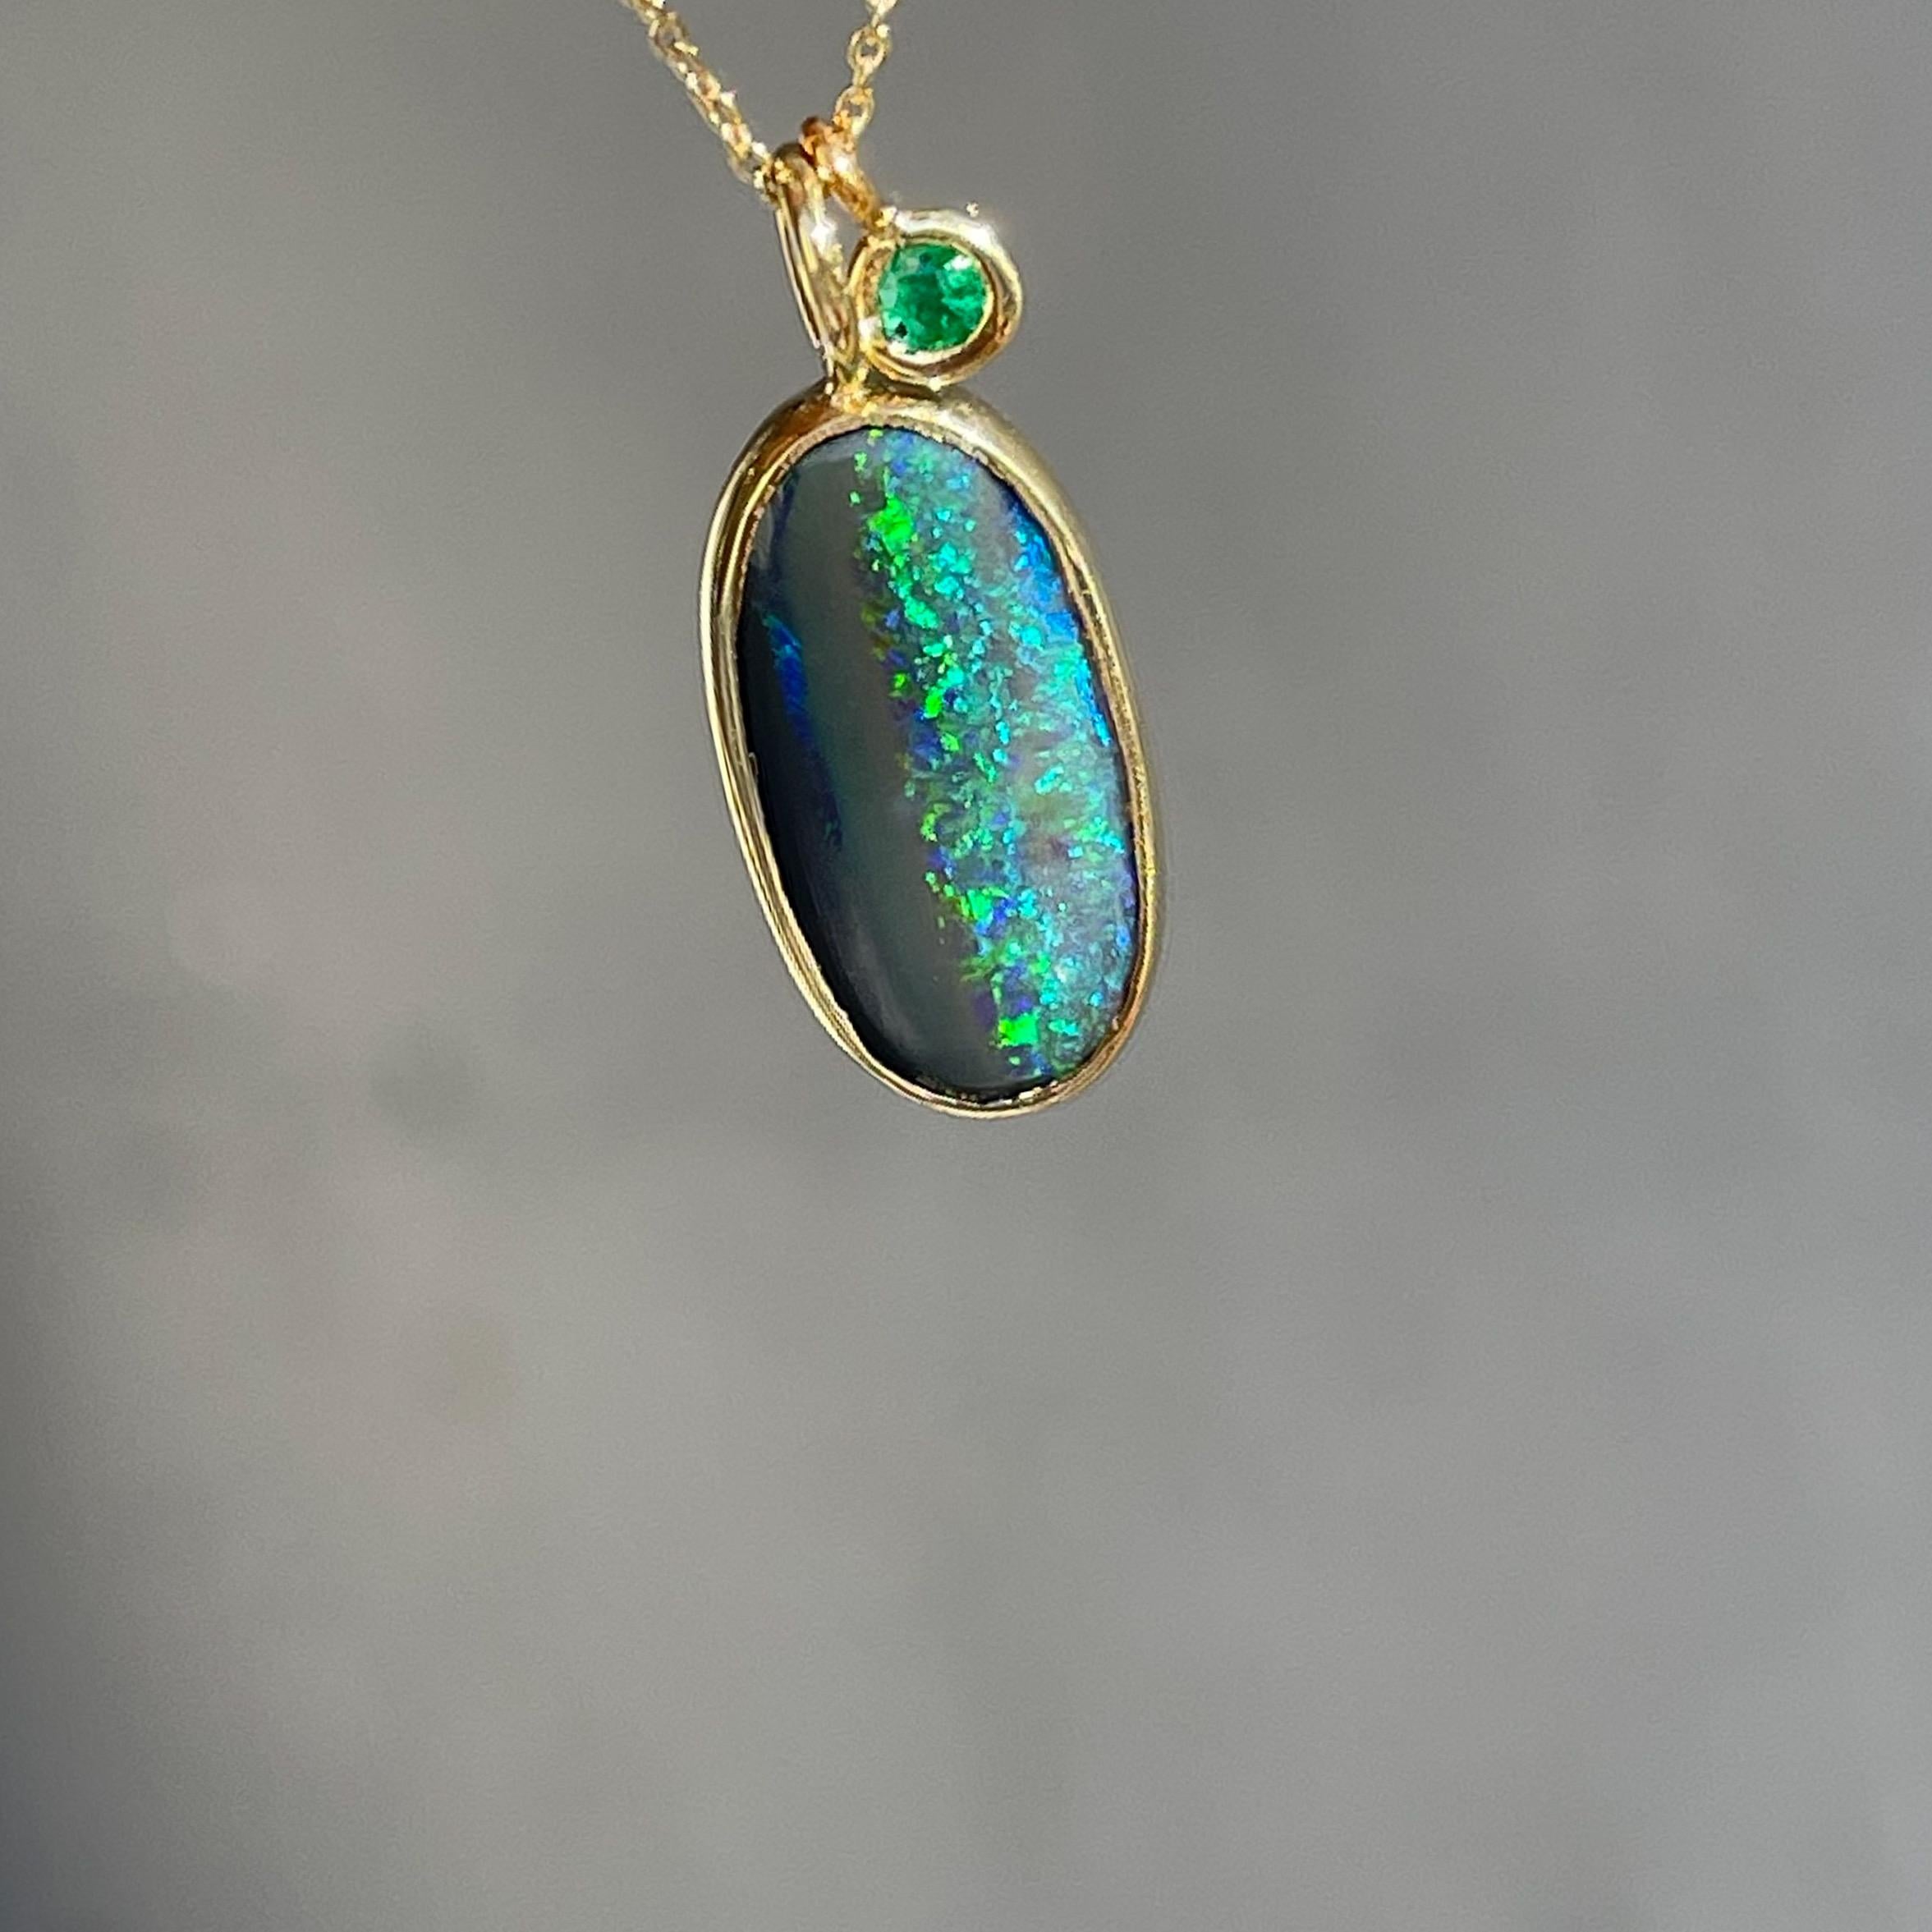 A striking black opal channels time in the Night Becomes Her Emerald and Opal Necklace. Oval in shape, the lightning ridge opal is black on one side and emerald green on the other — the split pattern reminiscent of a revolving moon, part in shadow.